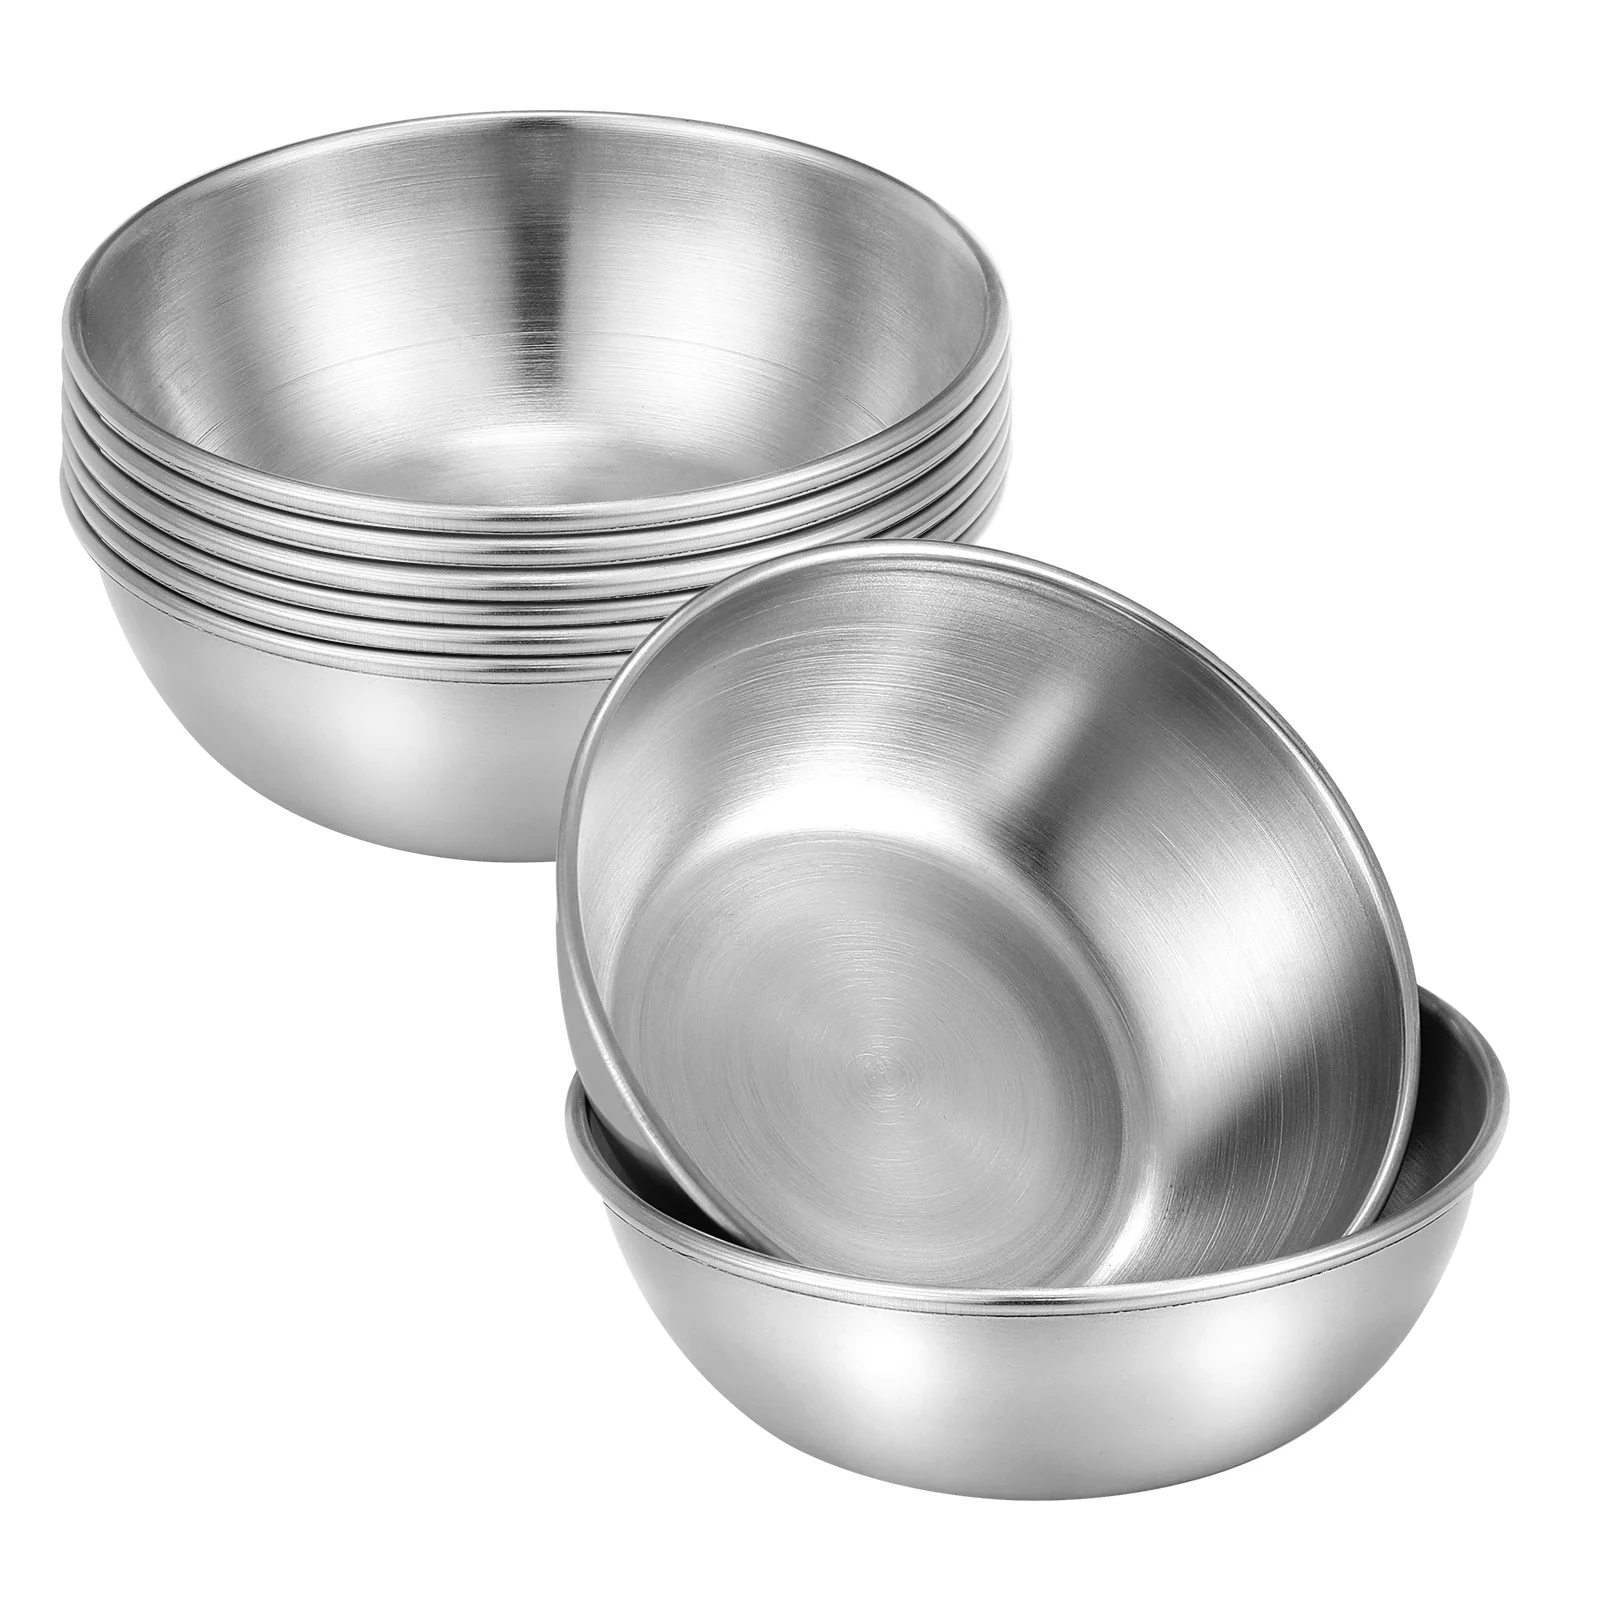 

Bowls Seasoning Sauce Dipping Dishes Bowl Cups Steel Stainless Dish Set Condiment Appetizer Mini Serving Plates Sushi Pudding